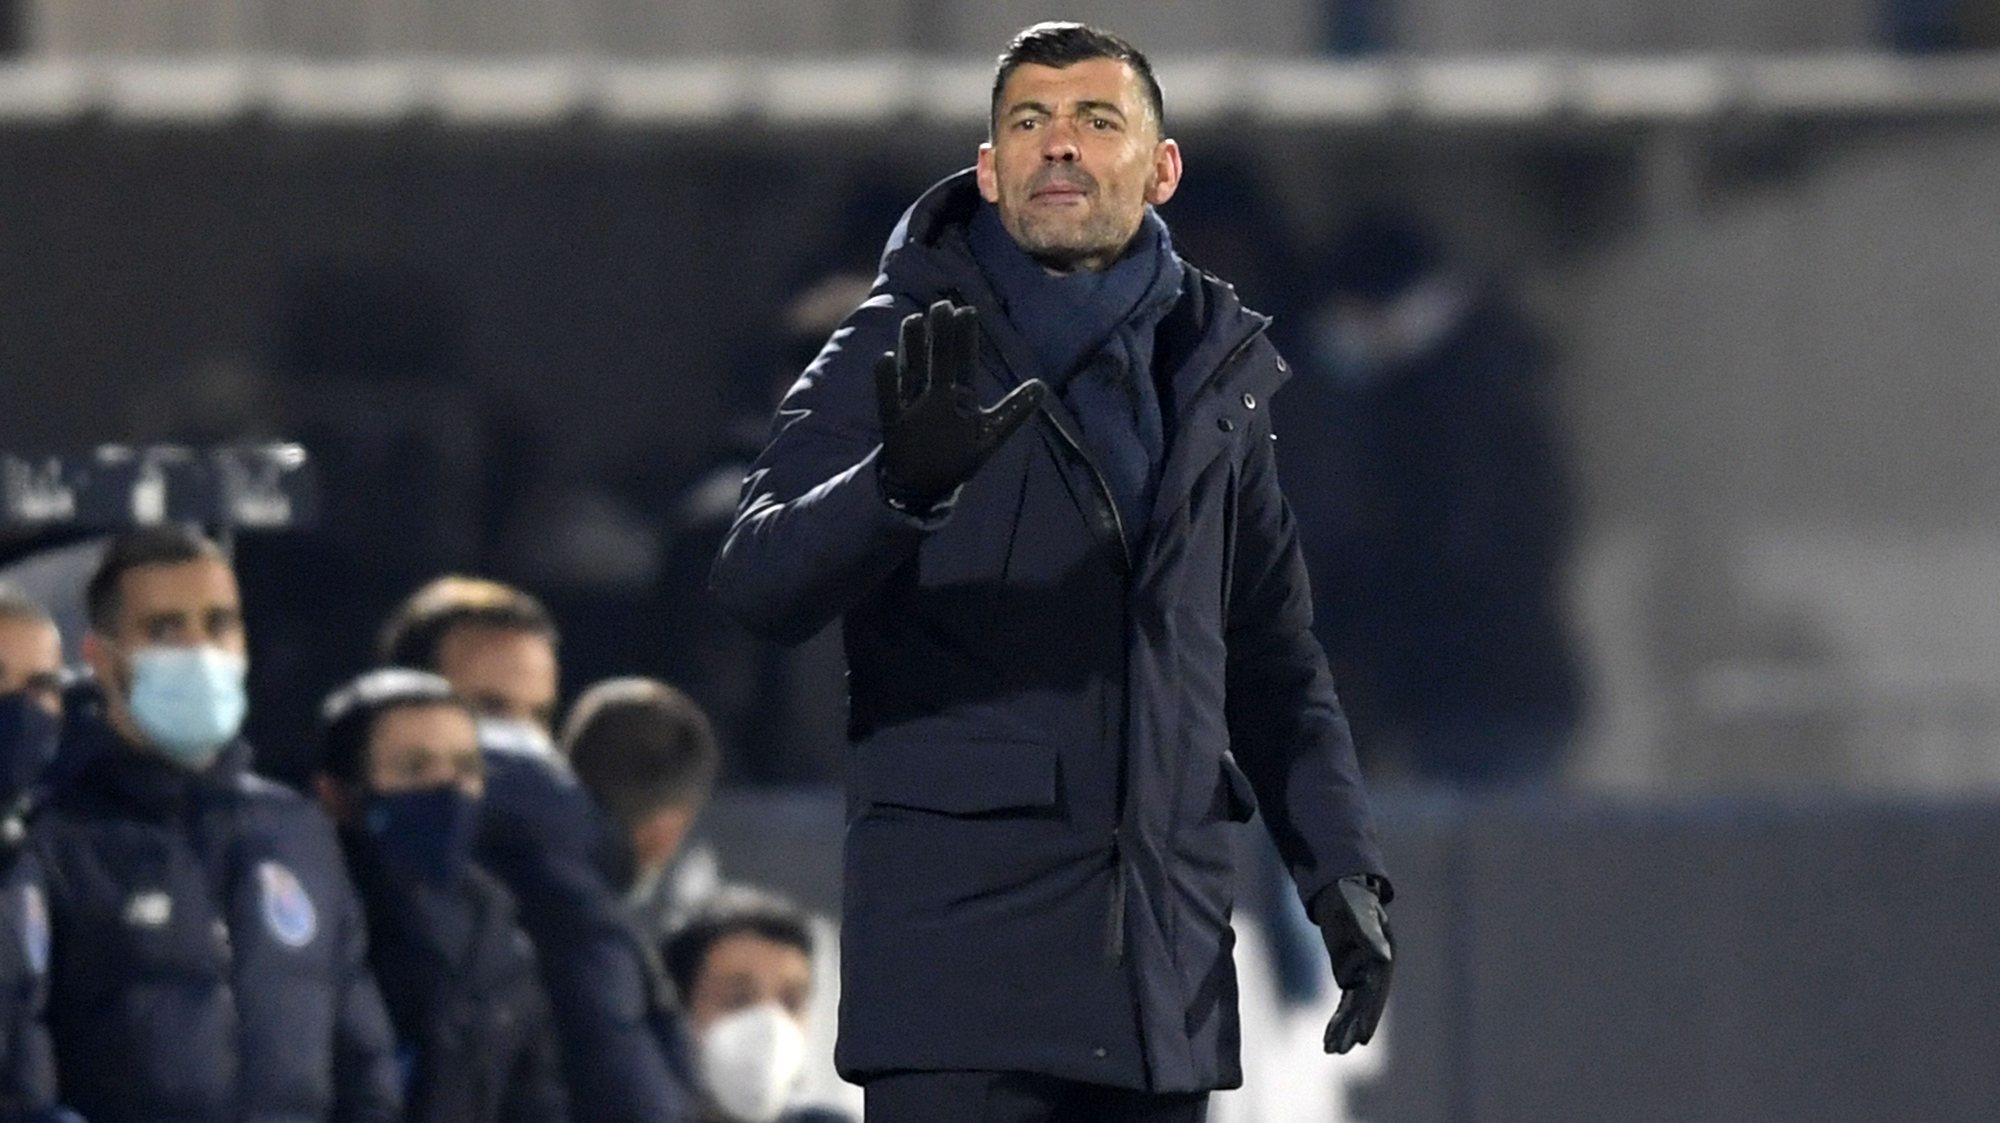 FC Porto head coach Sergio Conceicao gives instructions to his players during their Portuguese First League soccer match against Famalicao held at Municipal Stadium, in Famalicao, north of Portugal, 08 January 2021. FERNANDO VELUDO/LUSA